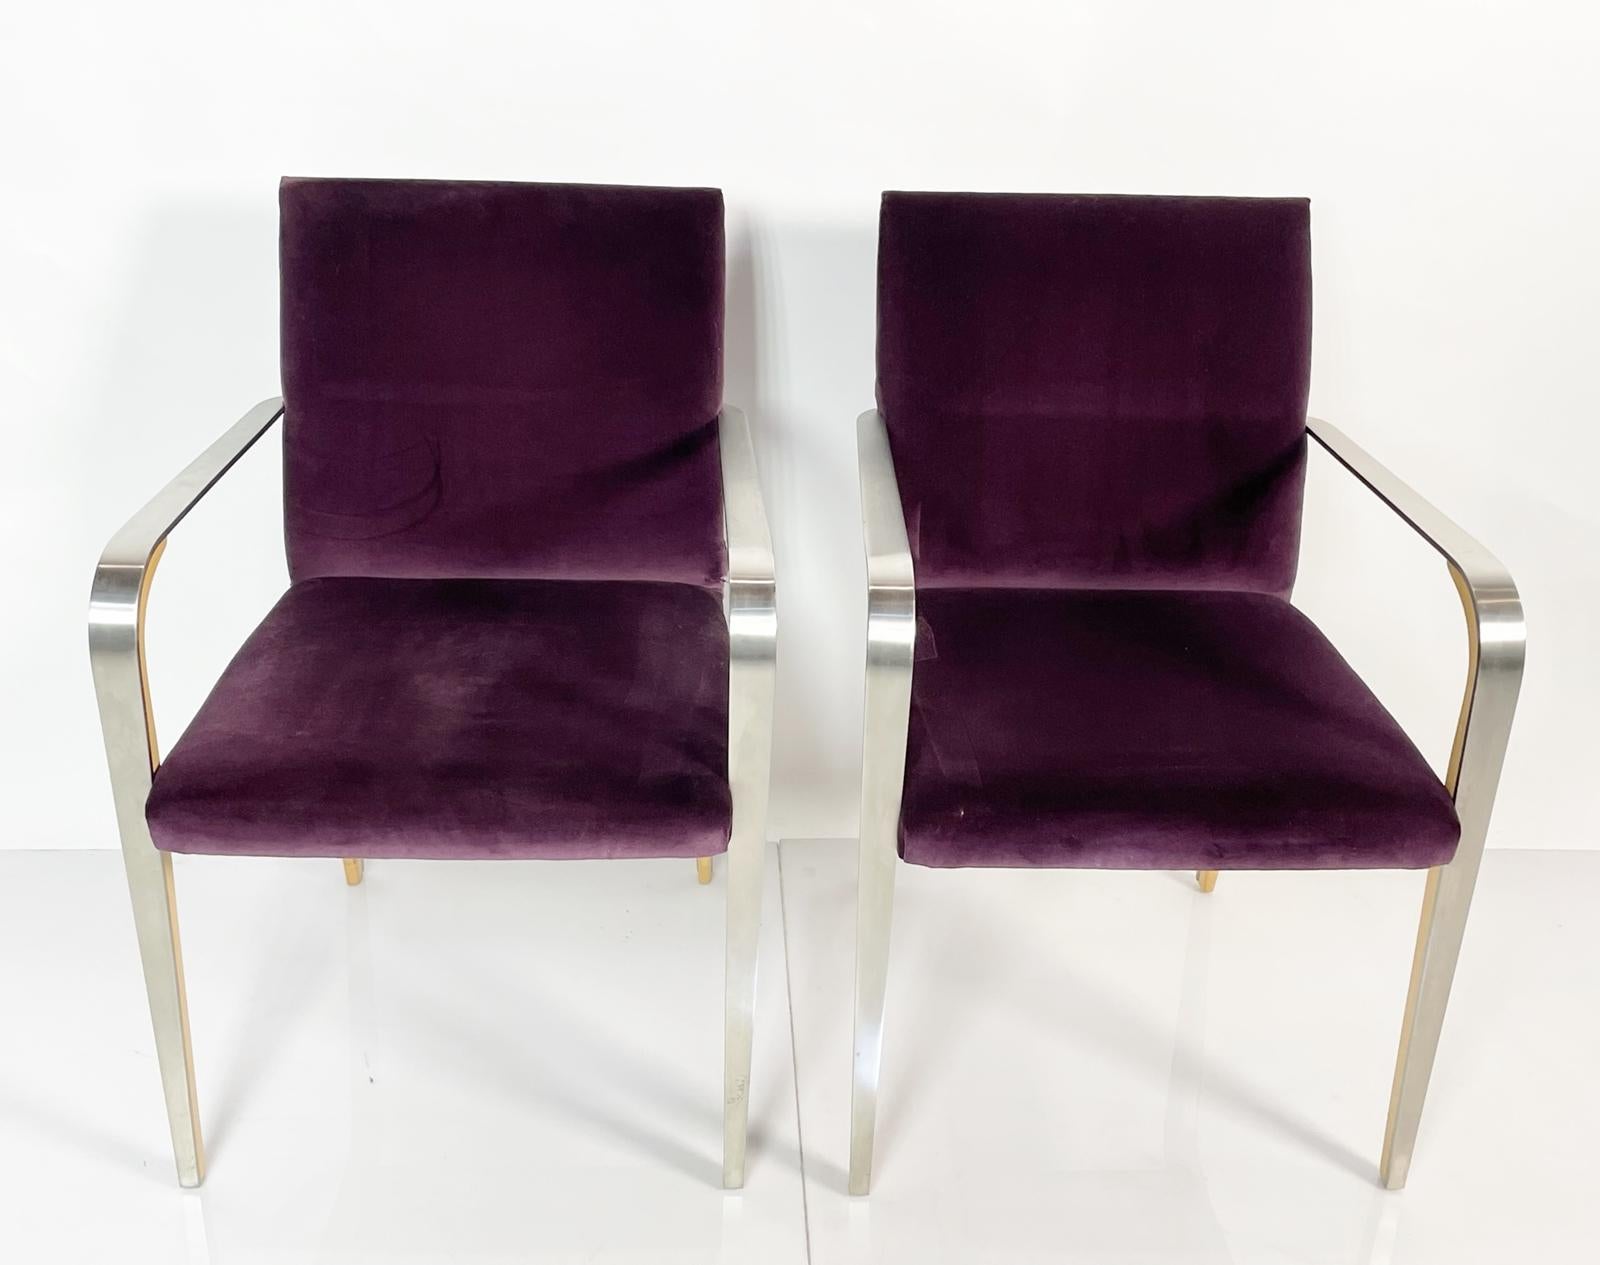 Introducing the perfect addition to any stylish living space - the Pair of Armchairs with Metal & Wood Frames by Bernhardt. These stunning chairs feature a sleek and modern design, with a metal frame on each side and beautiful wooden arms for added